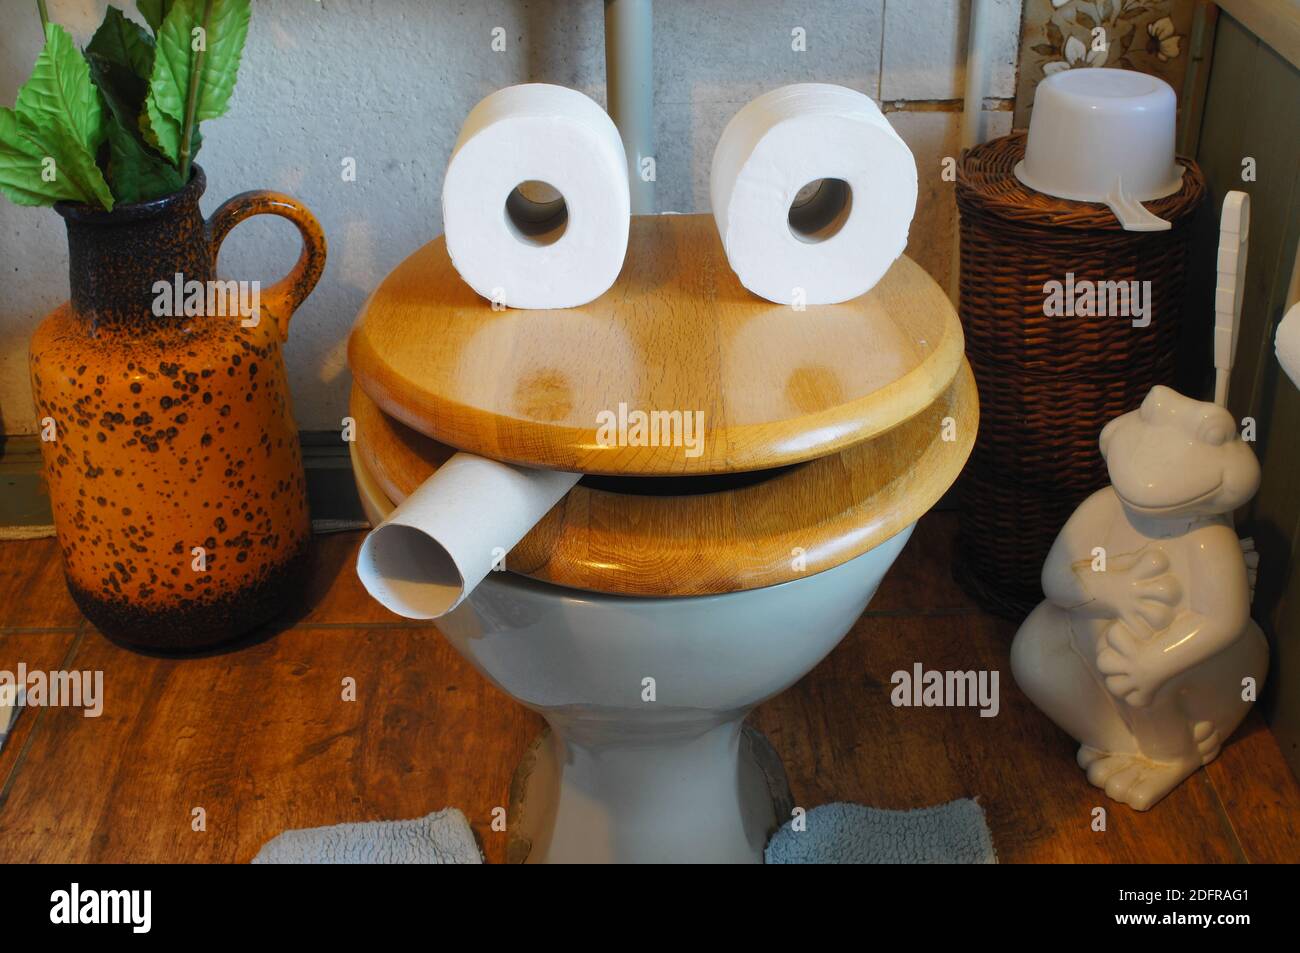 Humorous face created from a wooden toilet seat and bath tissue rolls in the bathroom Stock Photo